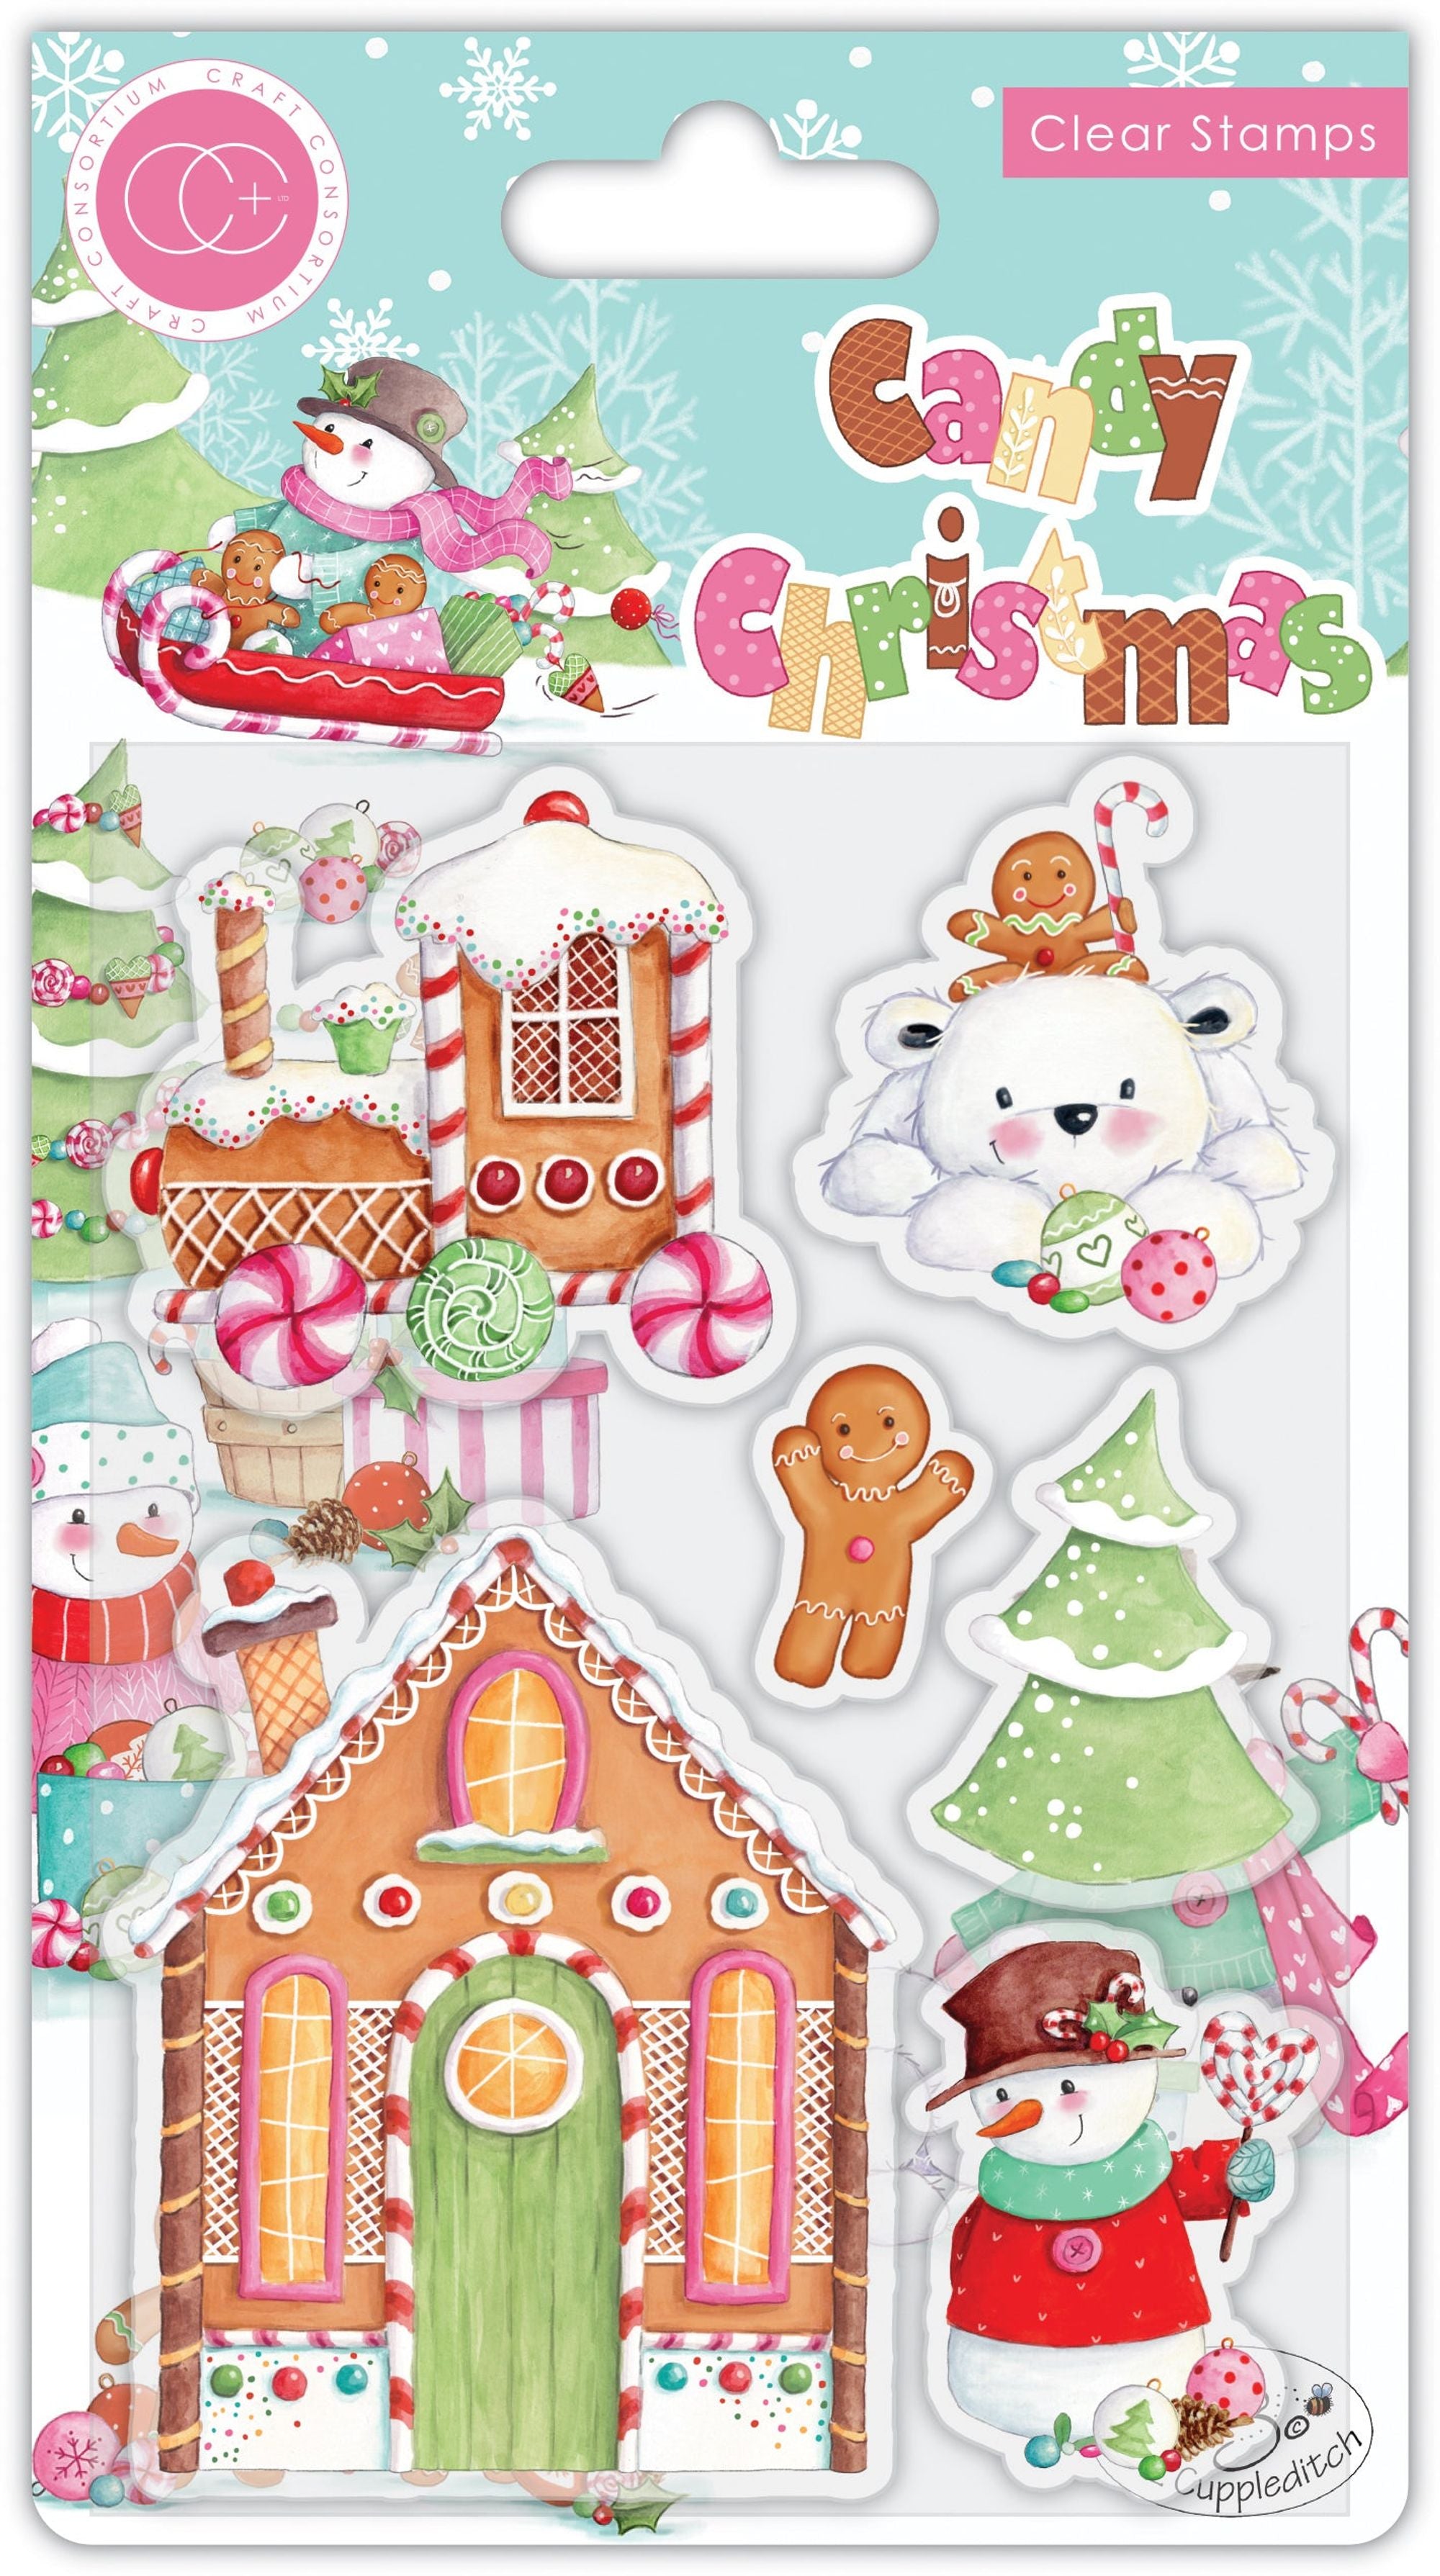 Craft Consortium Candy Christmas - Stamp Set - Candy